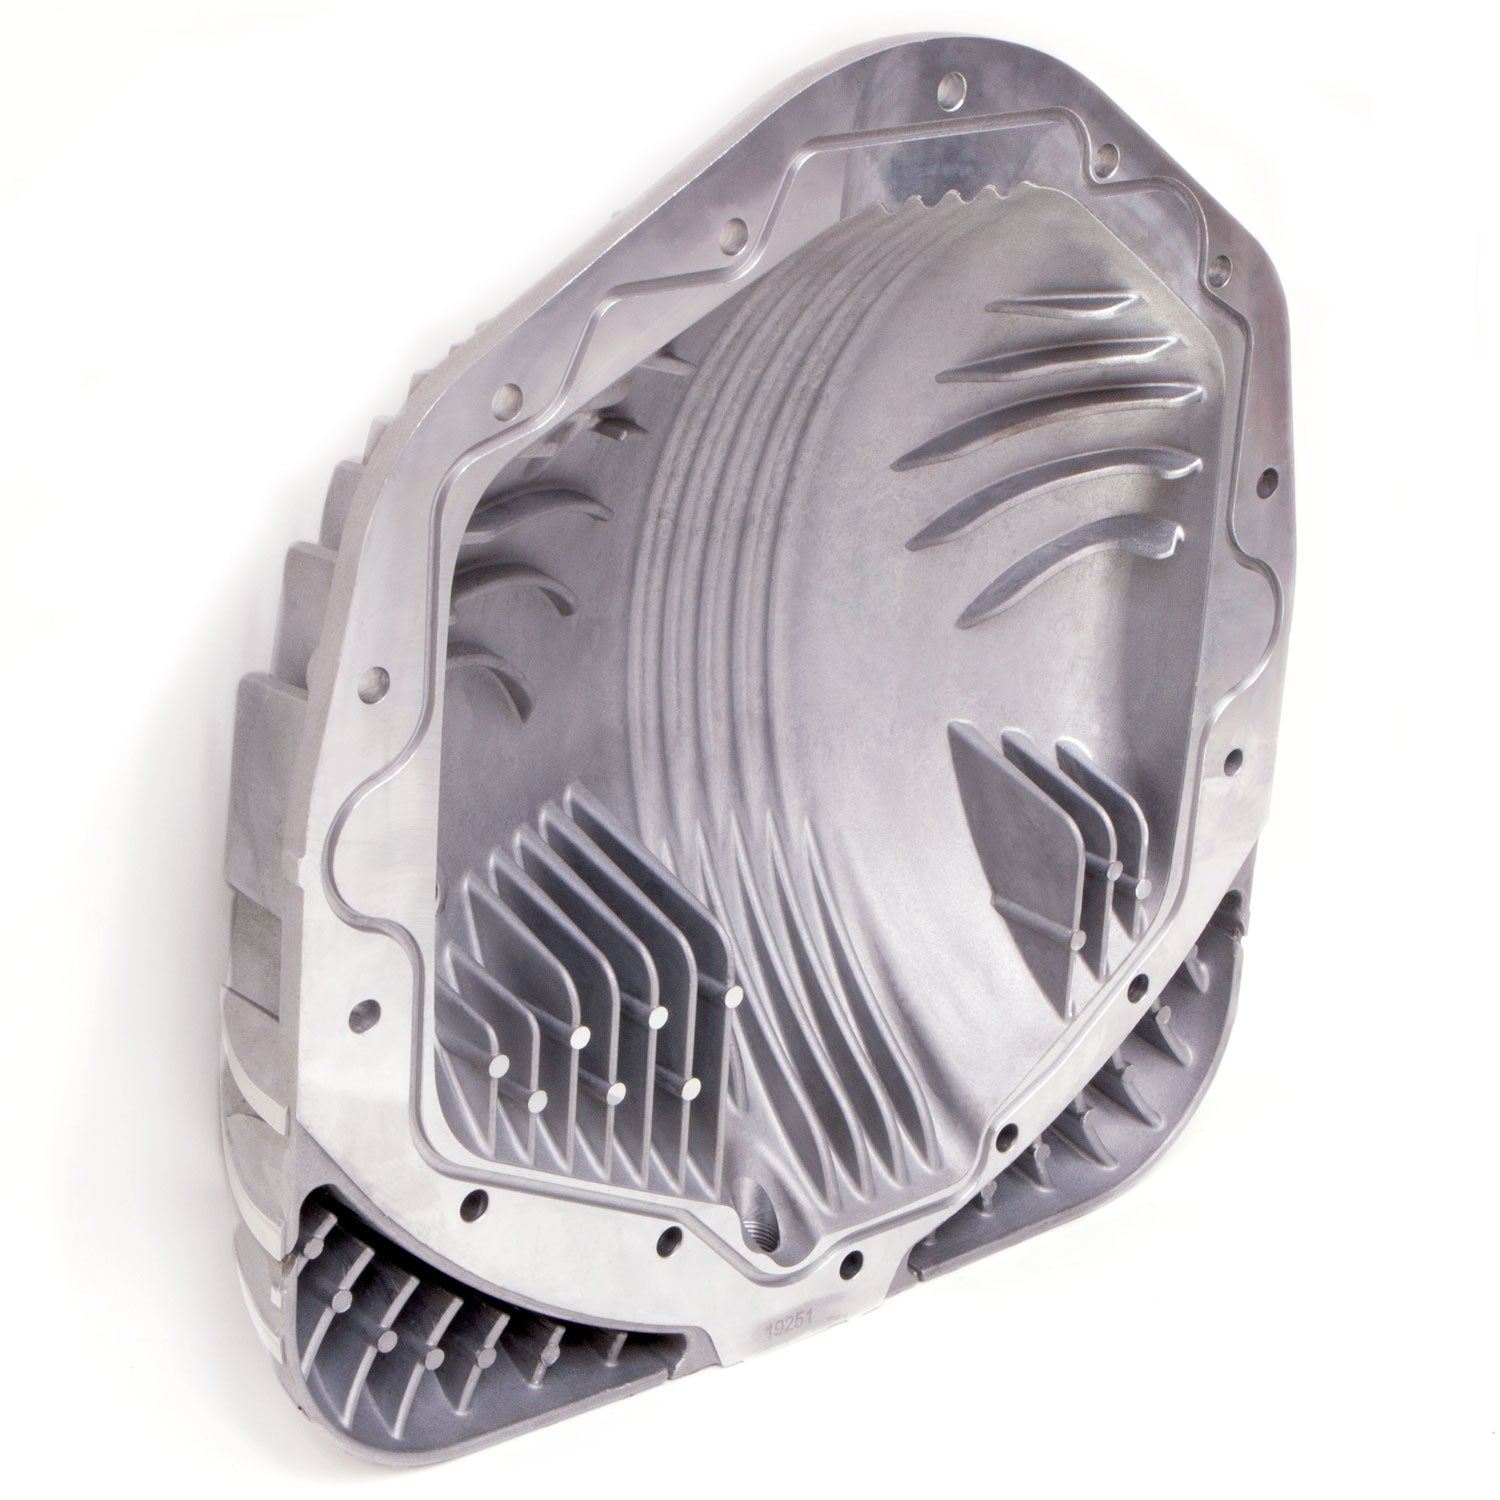 Inside photo of the Natural Aluminum 11.8in AAM Ram-Air Differential Cover